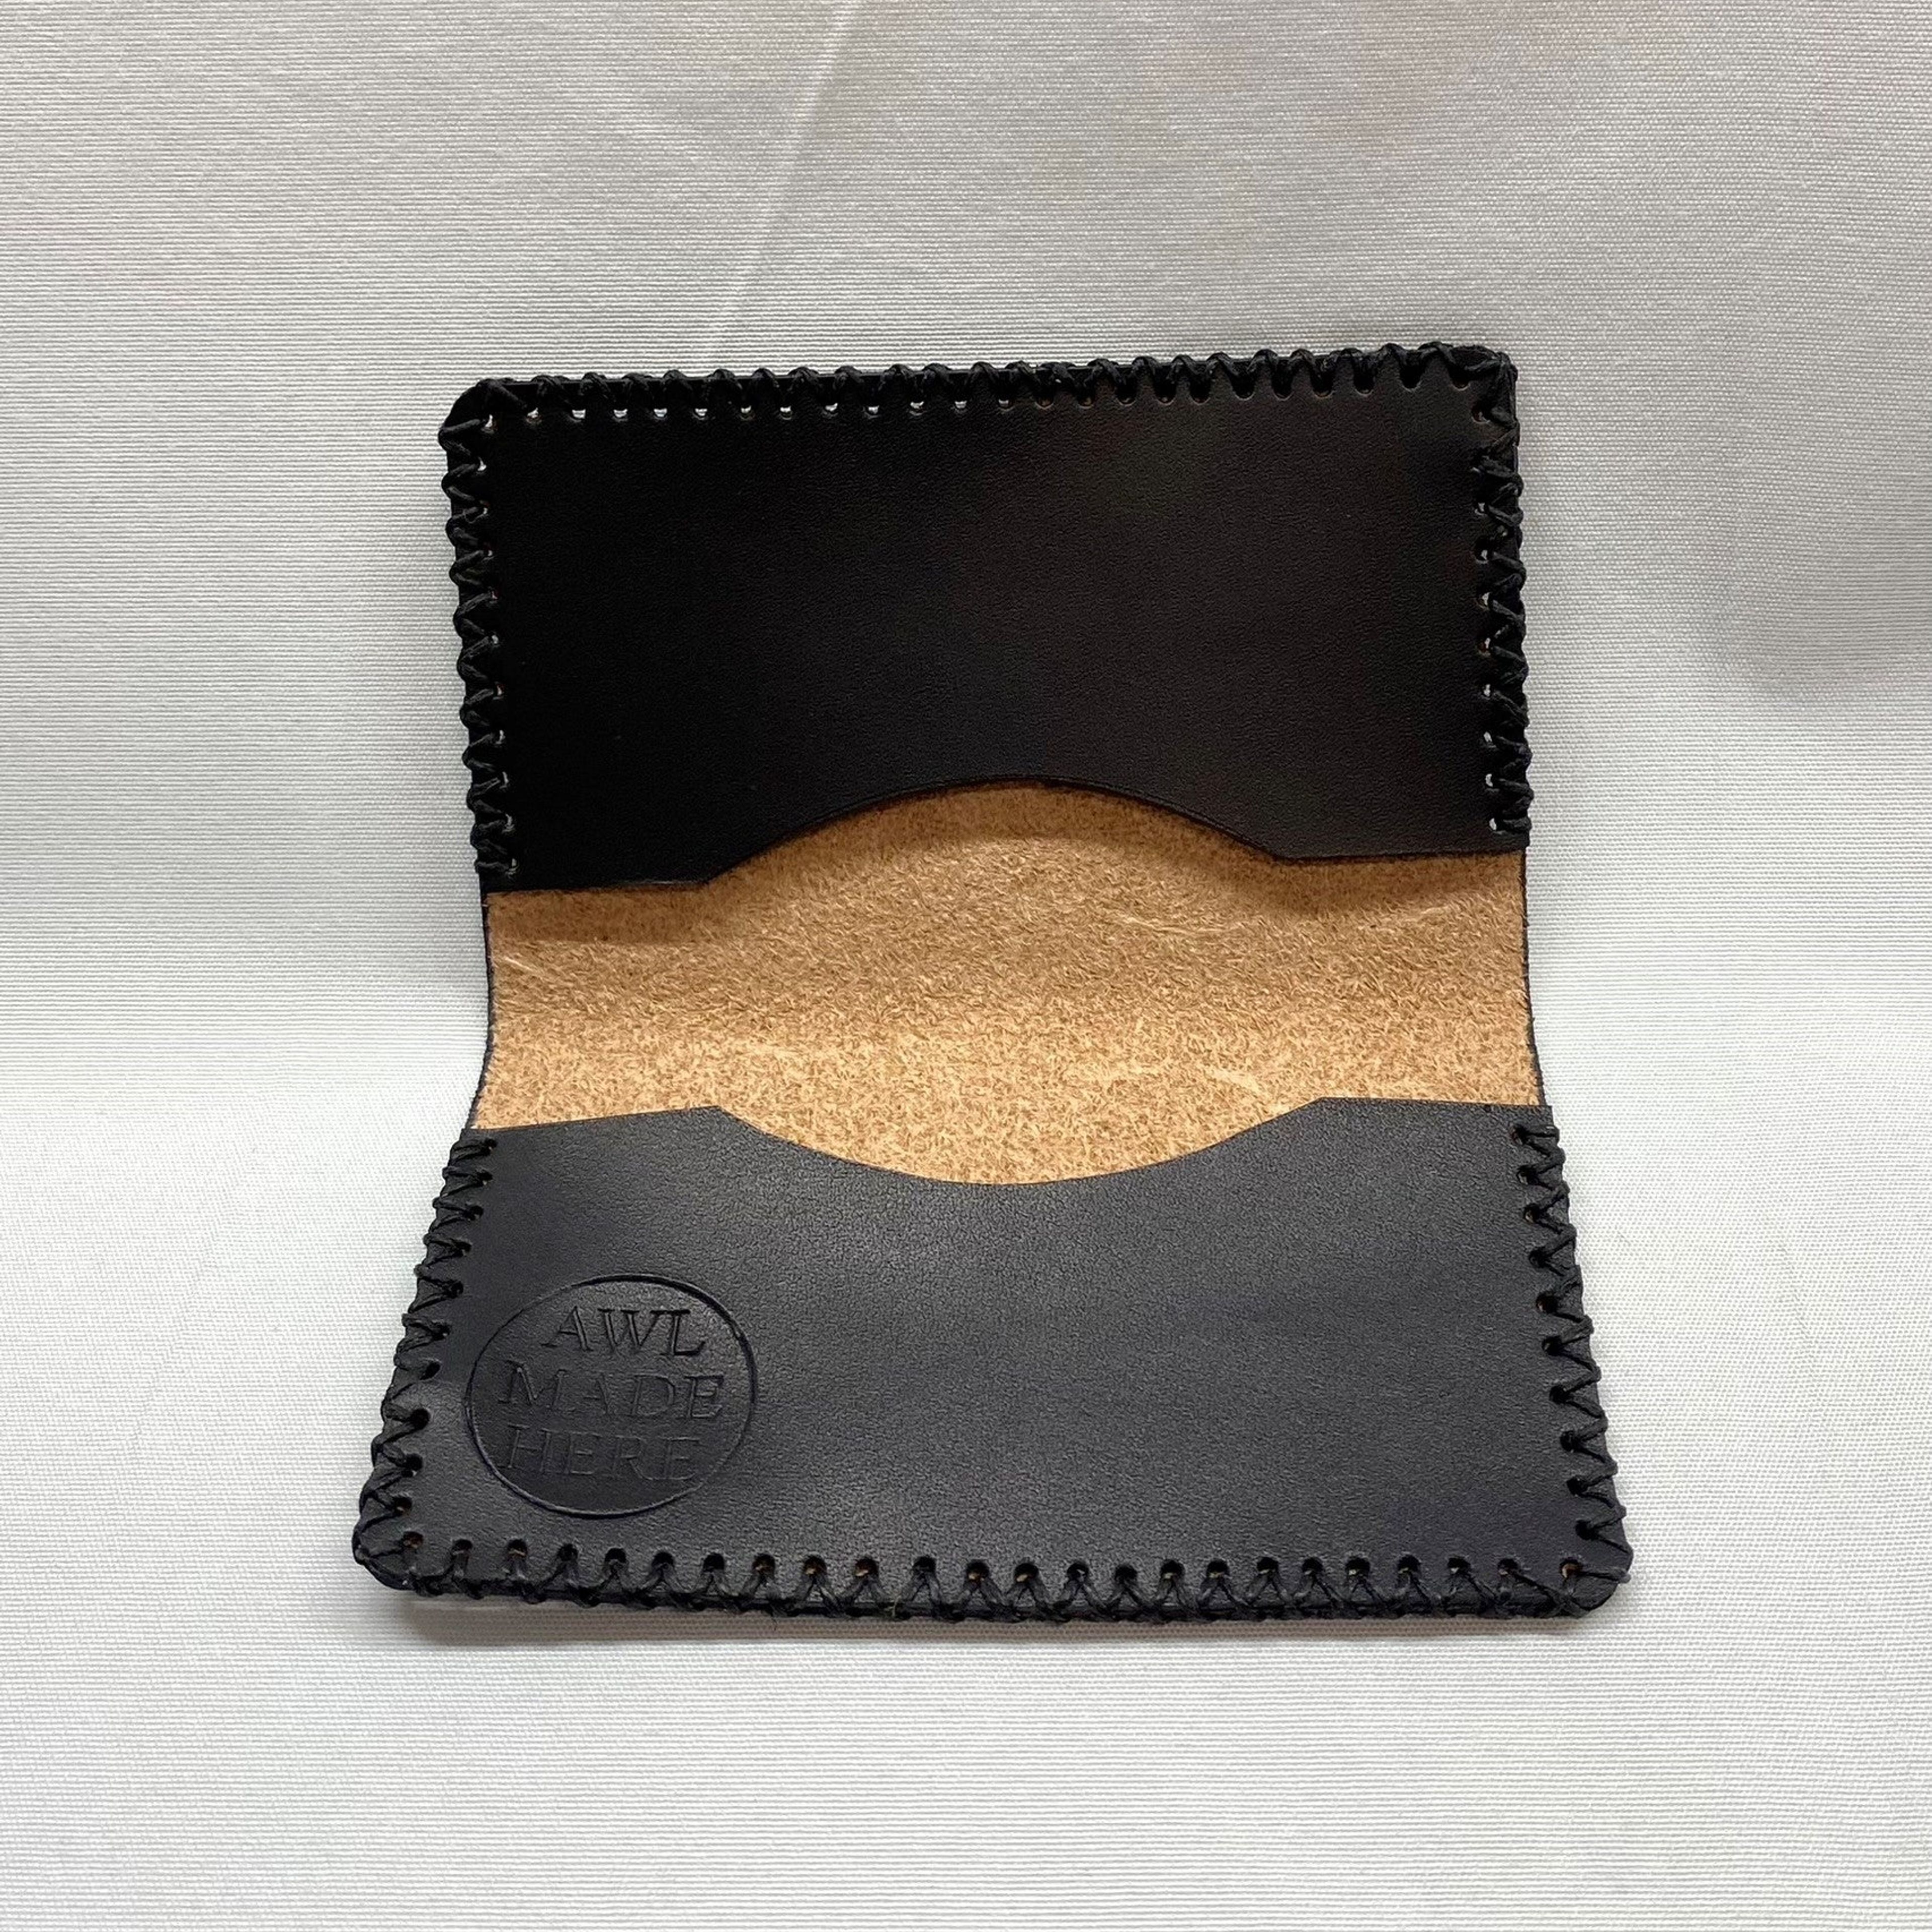 Card Case, Two Pockets. Black or Natural Tan